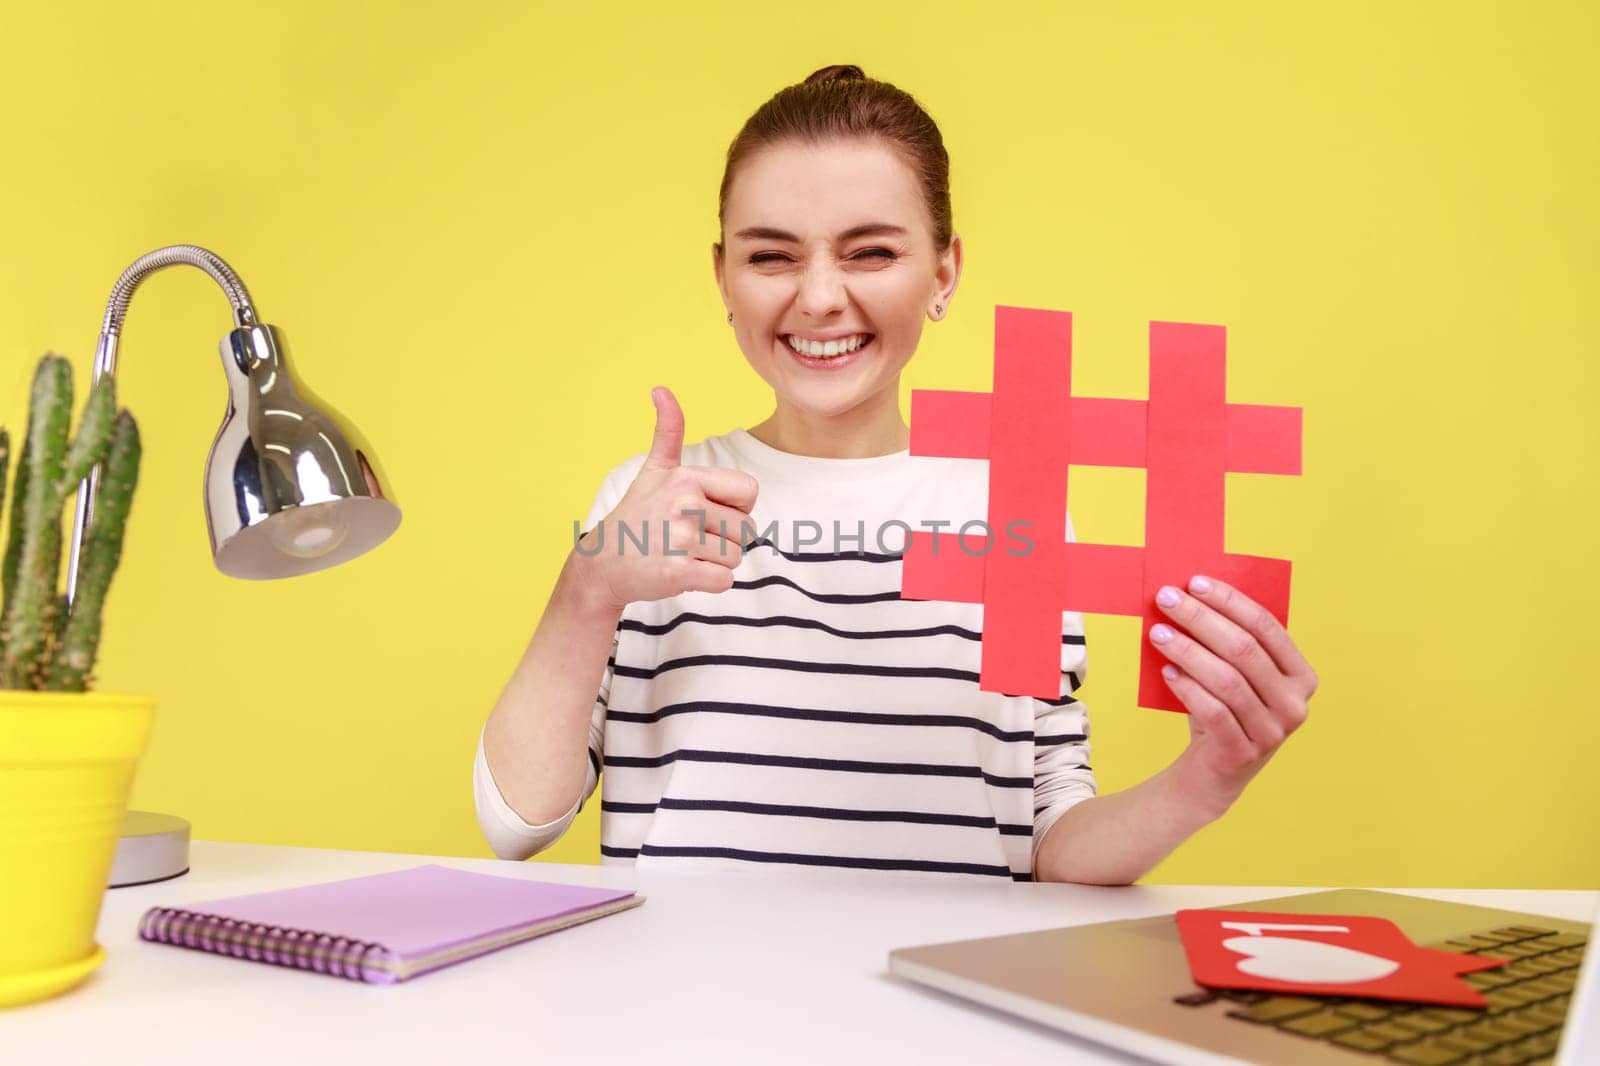 Smiling woman blogger in good mood, showing red hashtag and thumb up like gesture, taking selfie POV, sitting at workplace. Indoor studio studio shot isolated on yellow background.